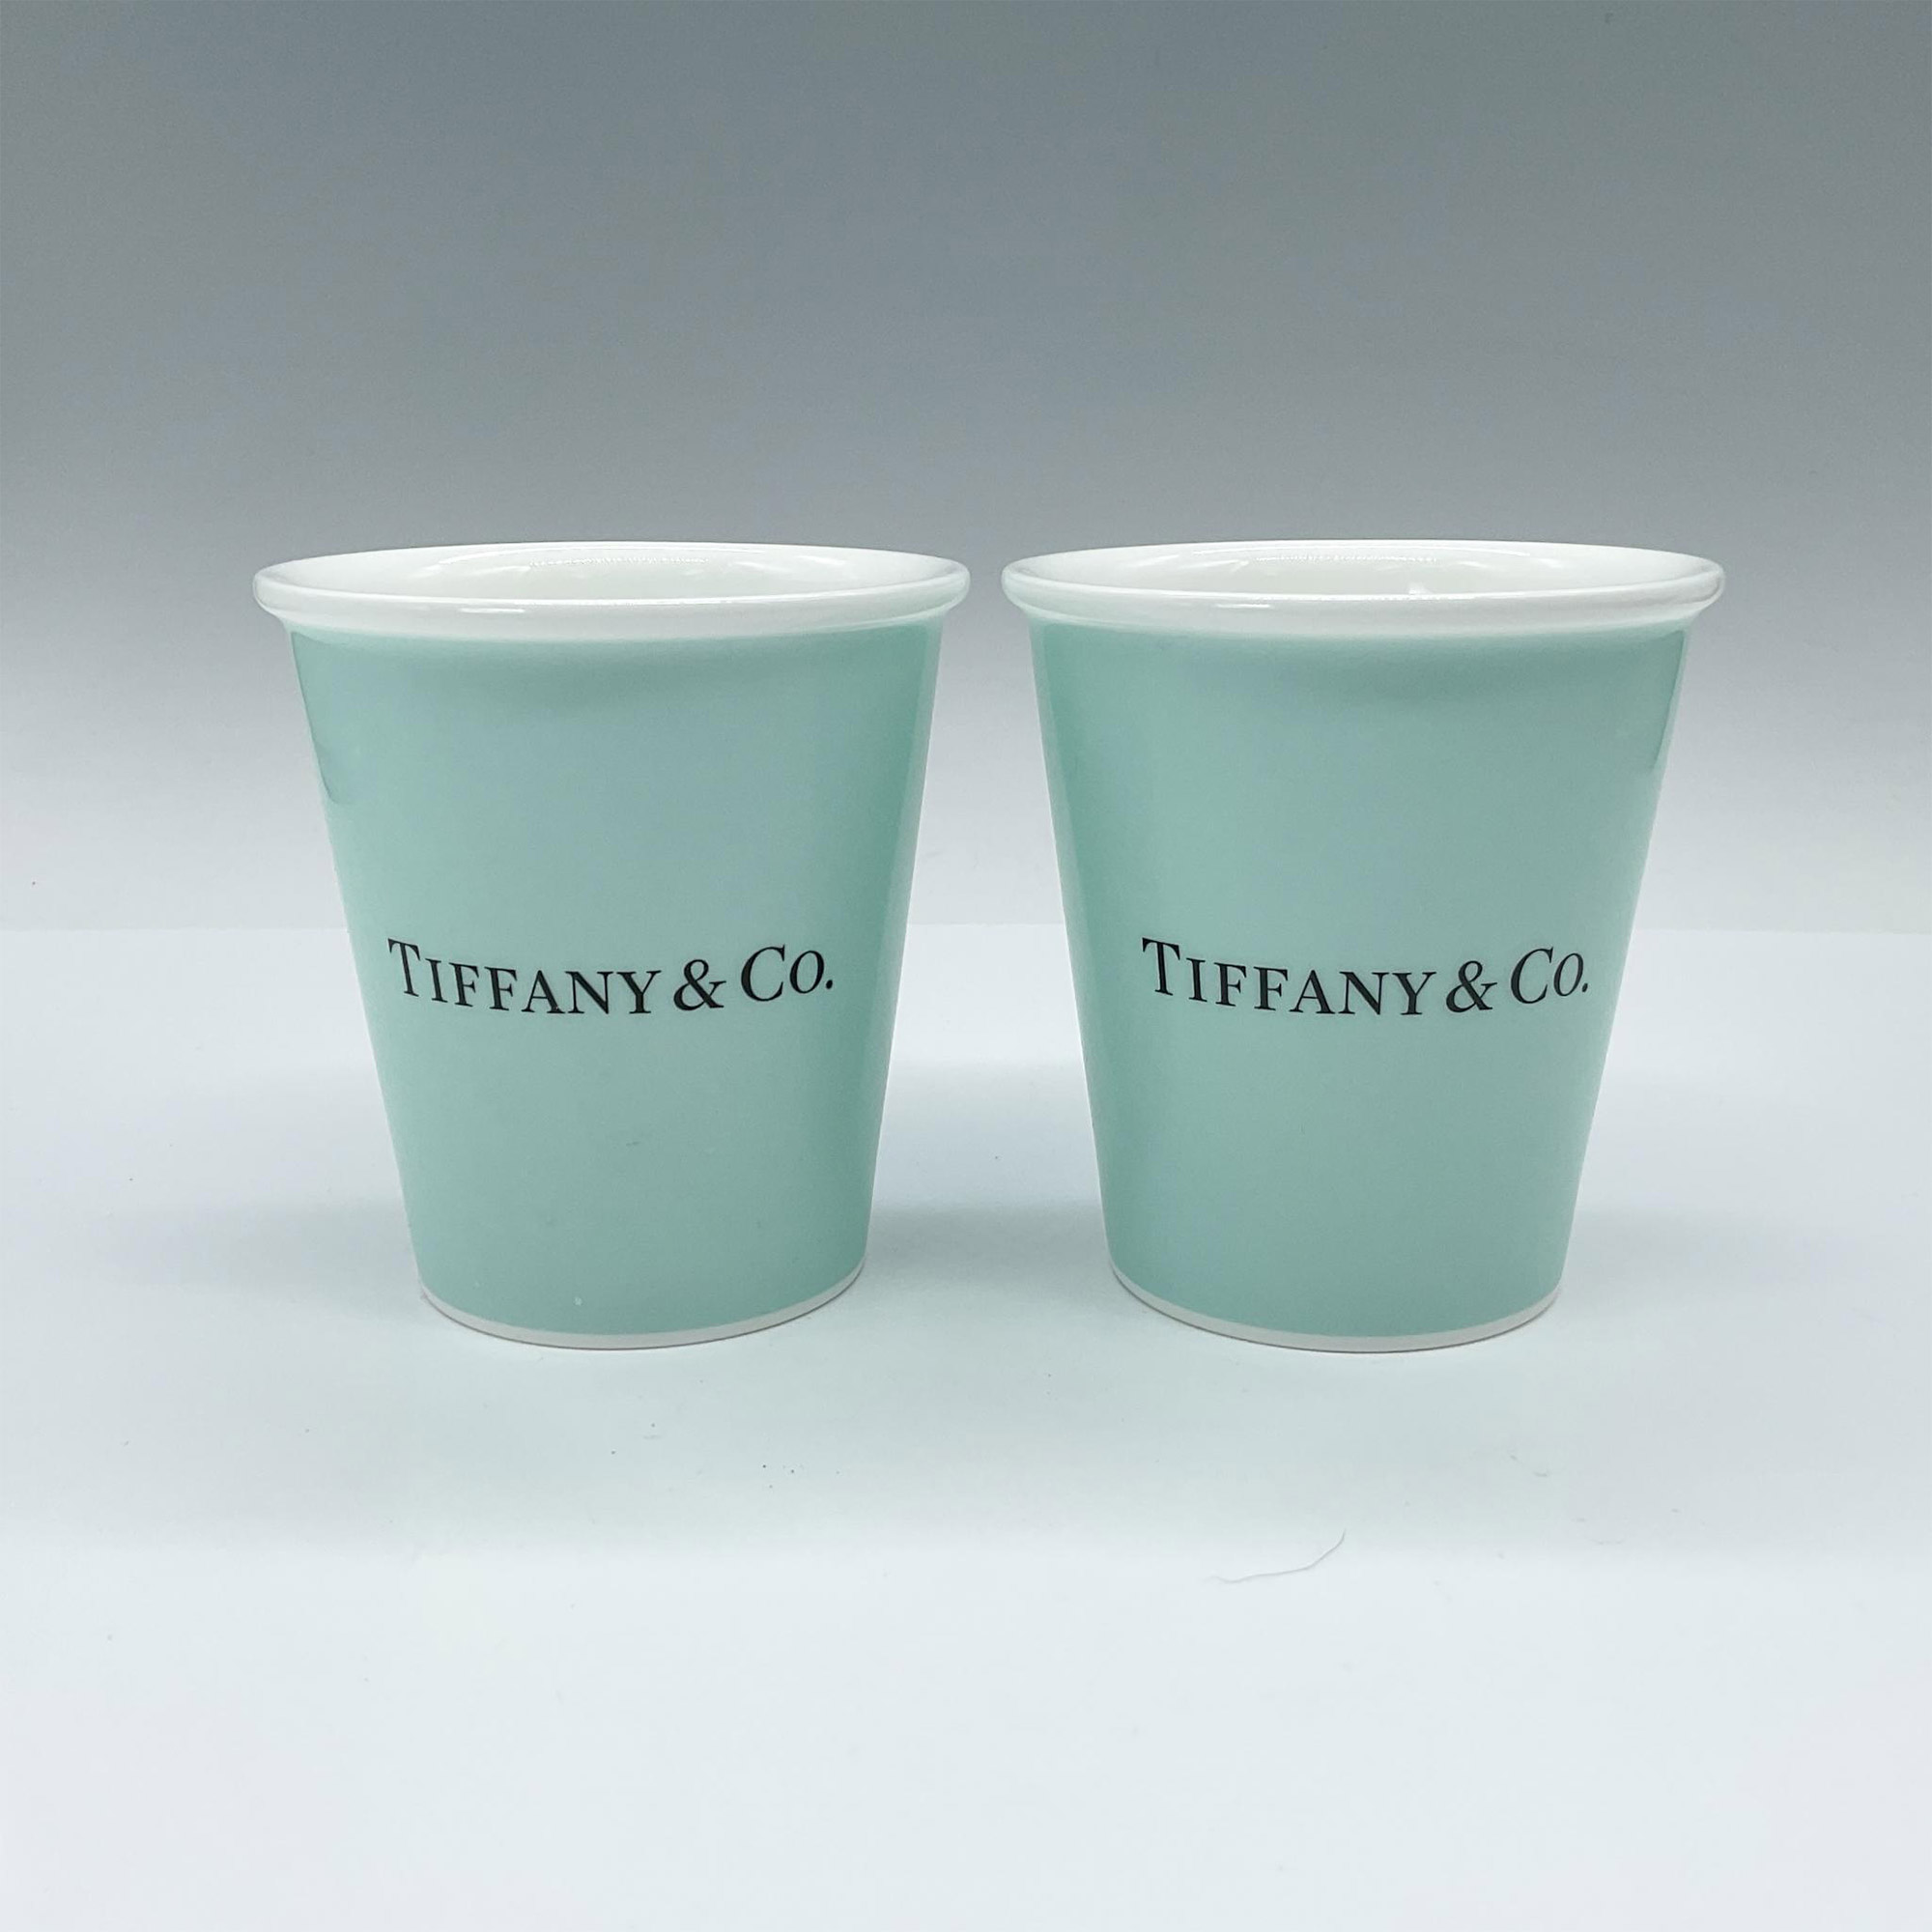 Pair of Bone China Tiffany & Co. Blue Coffee Cups - Image 2 of 4